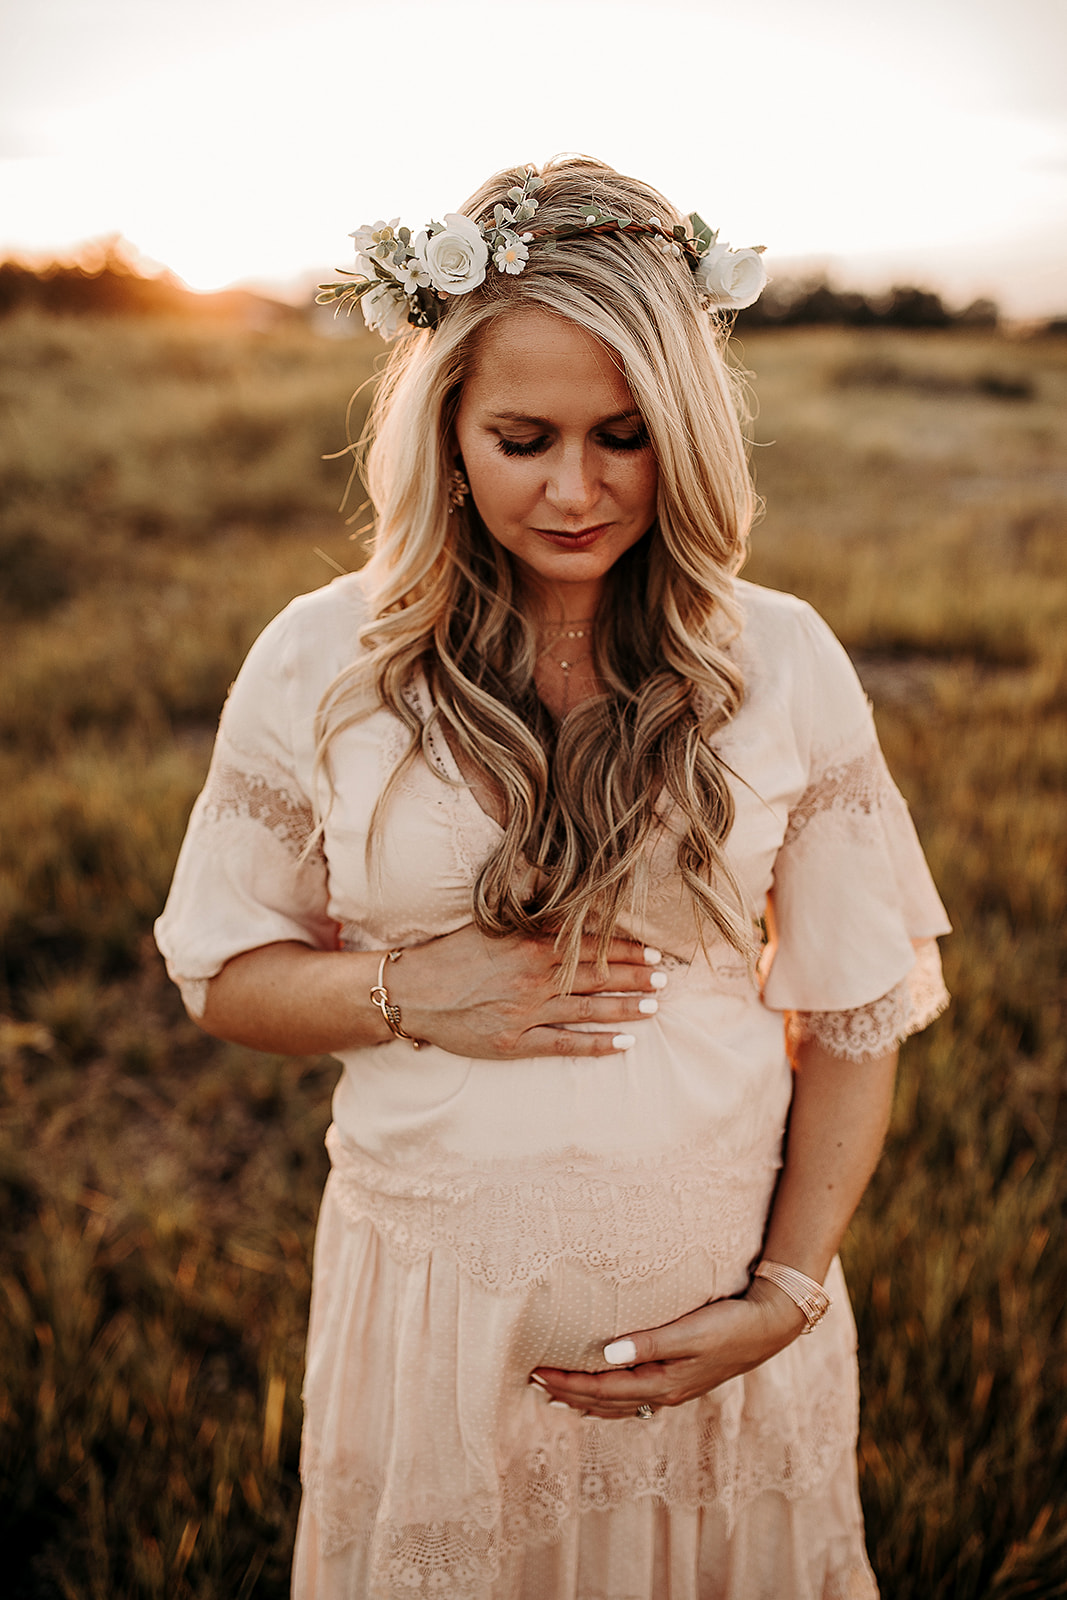 Dreamy maternity session from Jamie Hunt Photography featured on Nashville Baby Guide